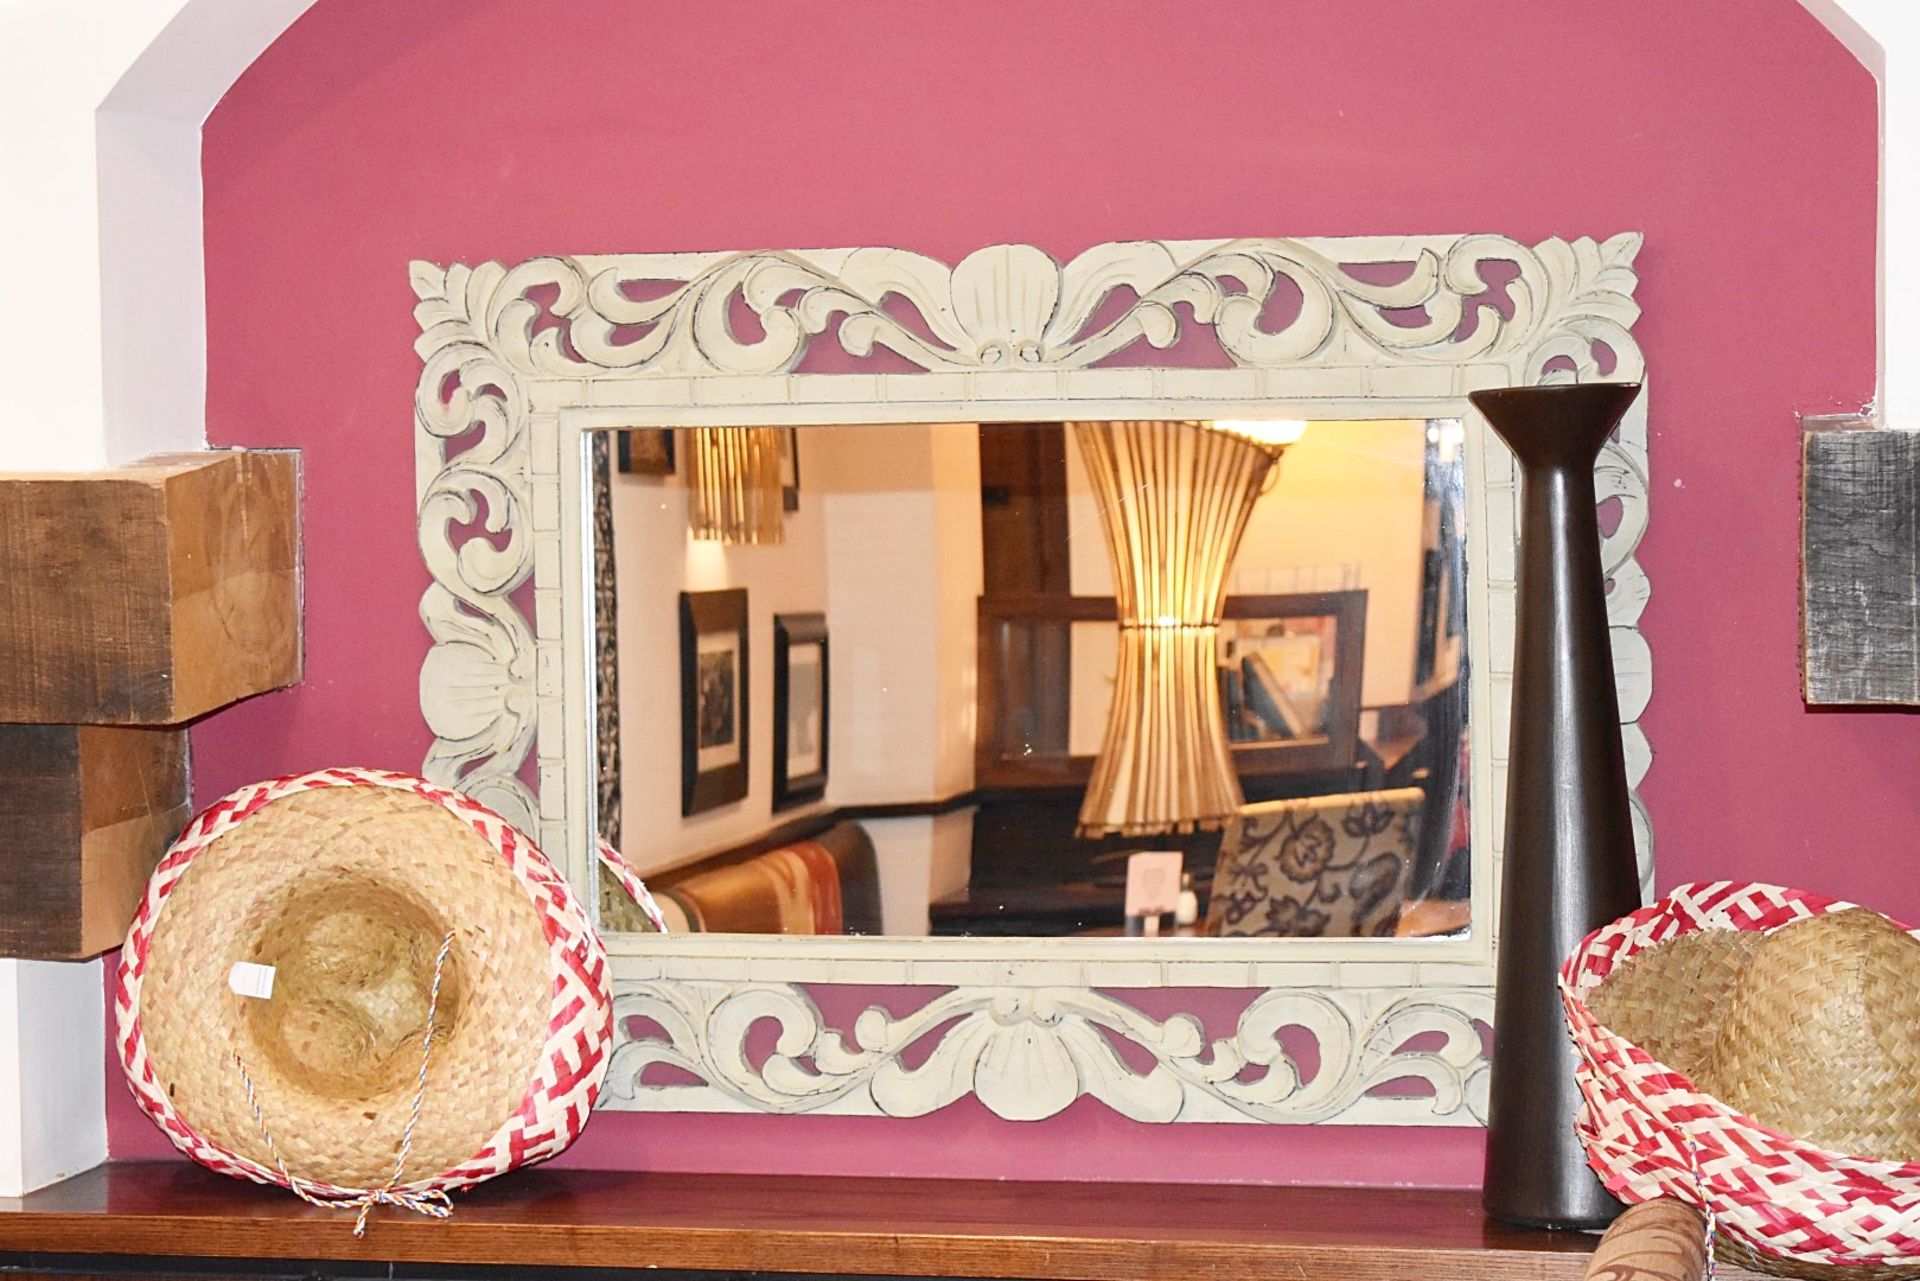 3 x Large Rectangular Wall Mirrors With Ornate Carved Wooden Frames In A Rustic White Wash - Image 4 of 5